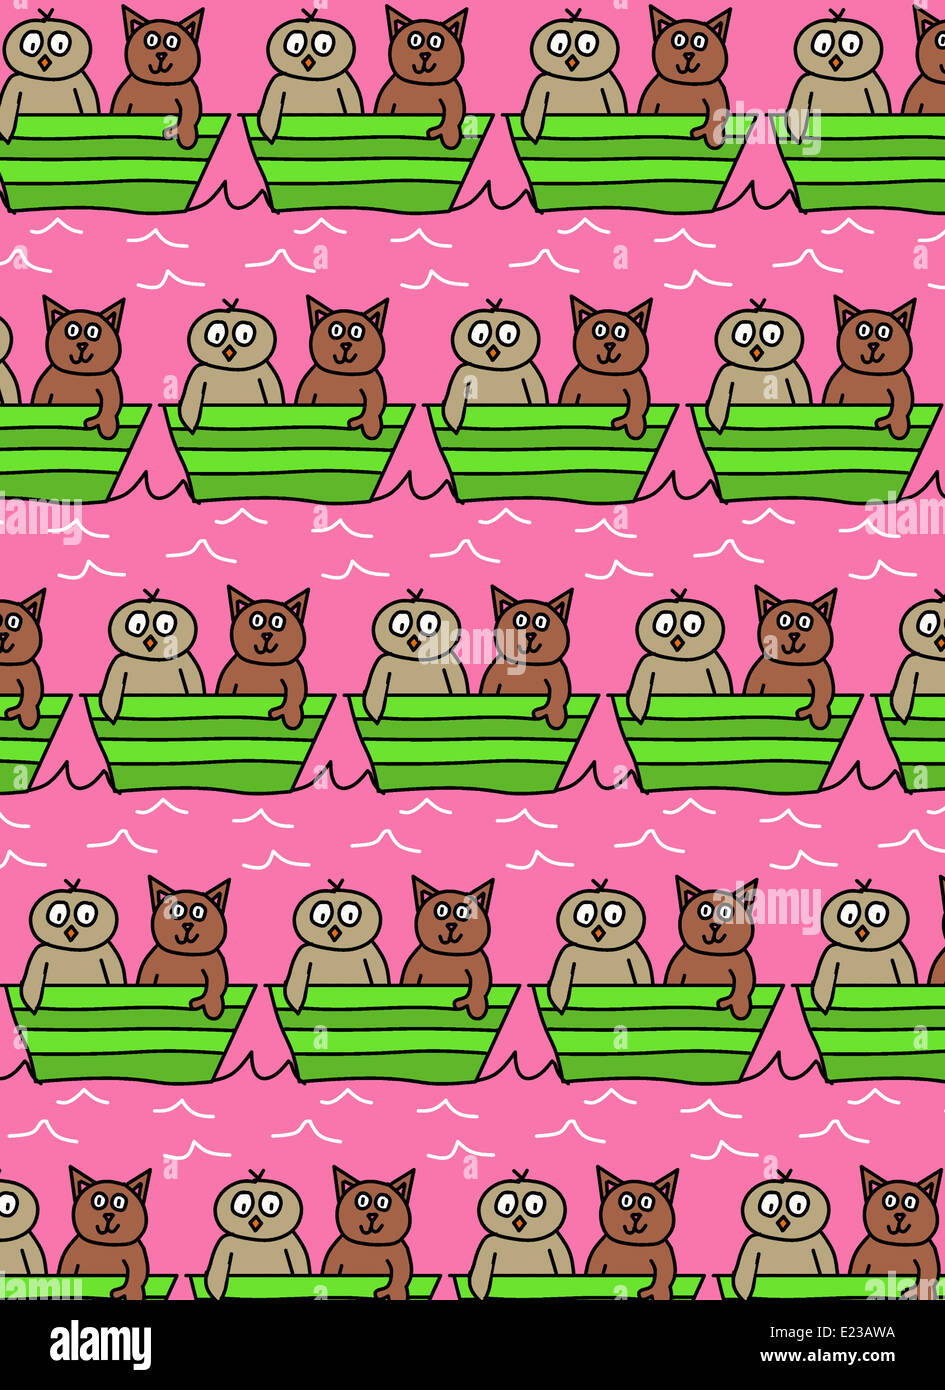 Illustration of repetitive owl and the pussycat design wallpaper Stock Photo